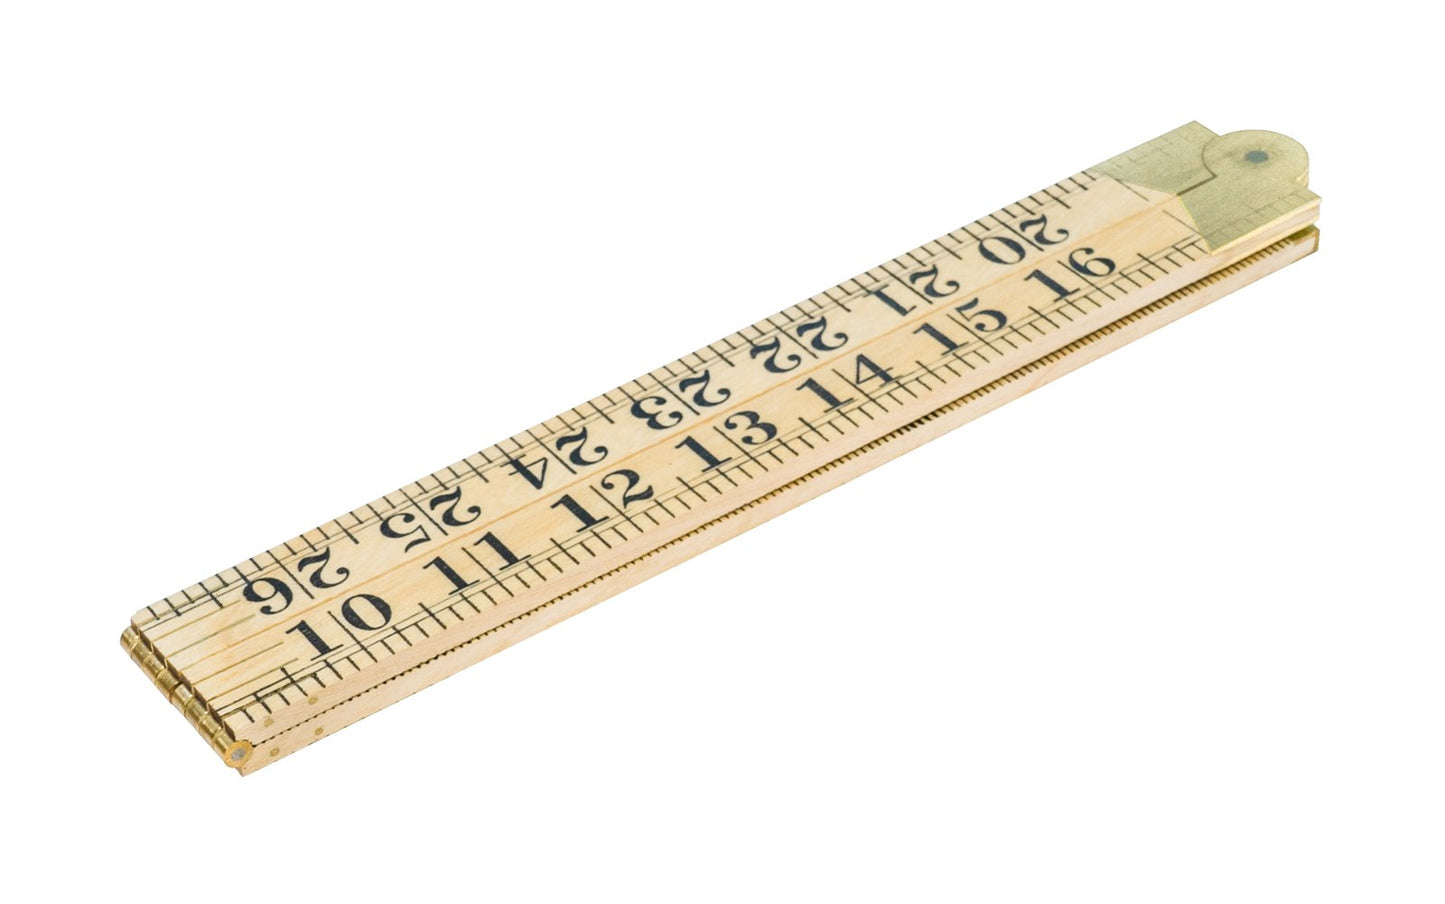 Made in Holland - Sybren - 3 foot long ruler - 3' rule - 3' ruler ~ Readings in 8ths, 16ths, 32nds, 64ths - 3/4" Wide - Sybren Ruler - Sybren Rule - Hardwood Rule - Etched Graduations - Yardstick - 3 foot wooden ruler - 3' hardwood ruler - Foldable rule - Foldable European Ruler - Brass joints - Brass Hardware 650-1167